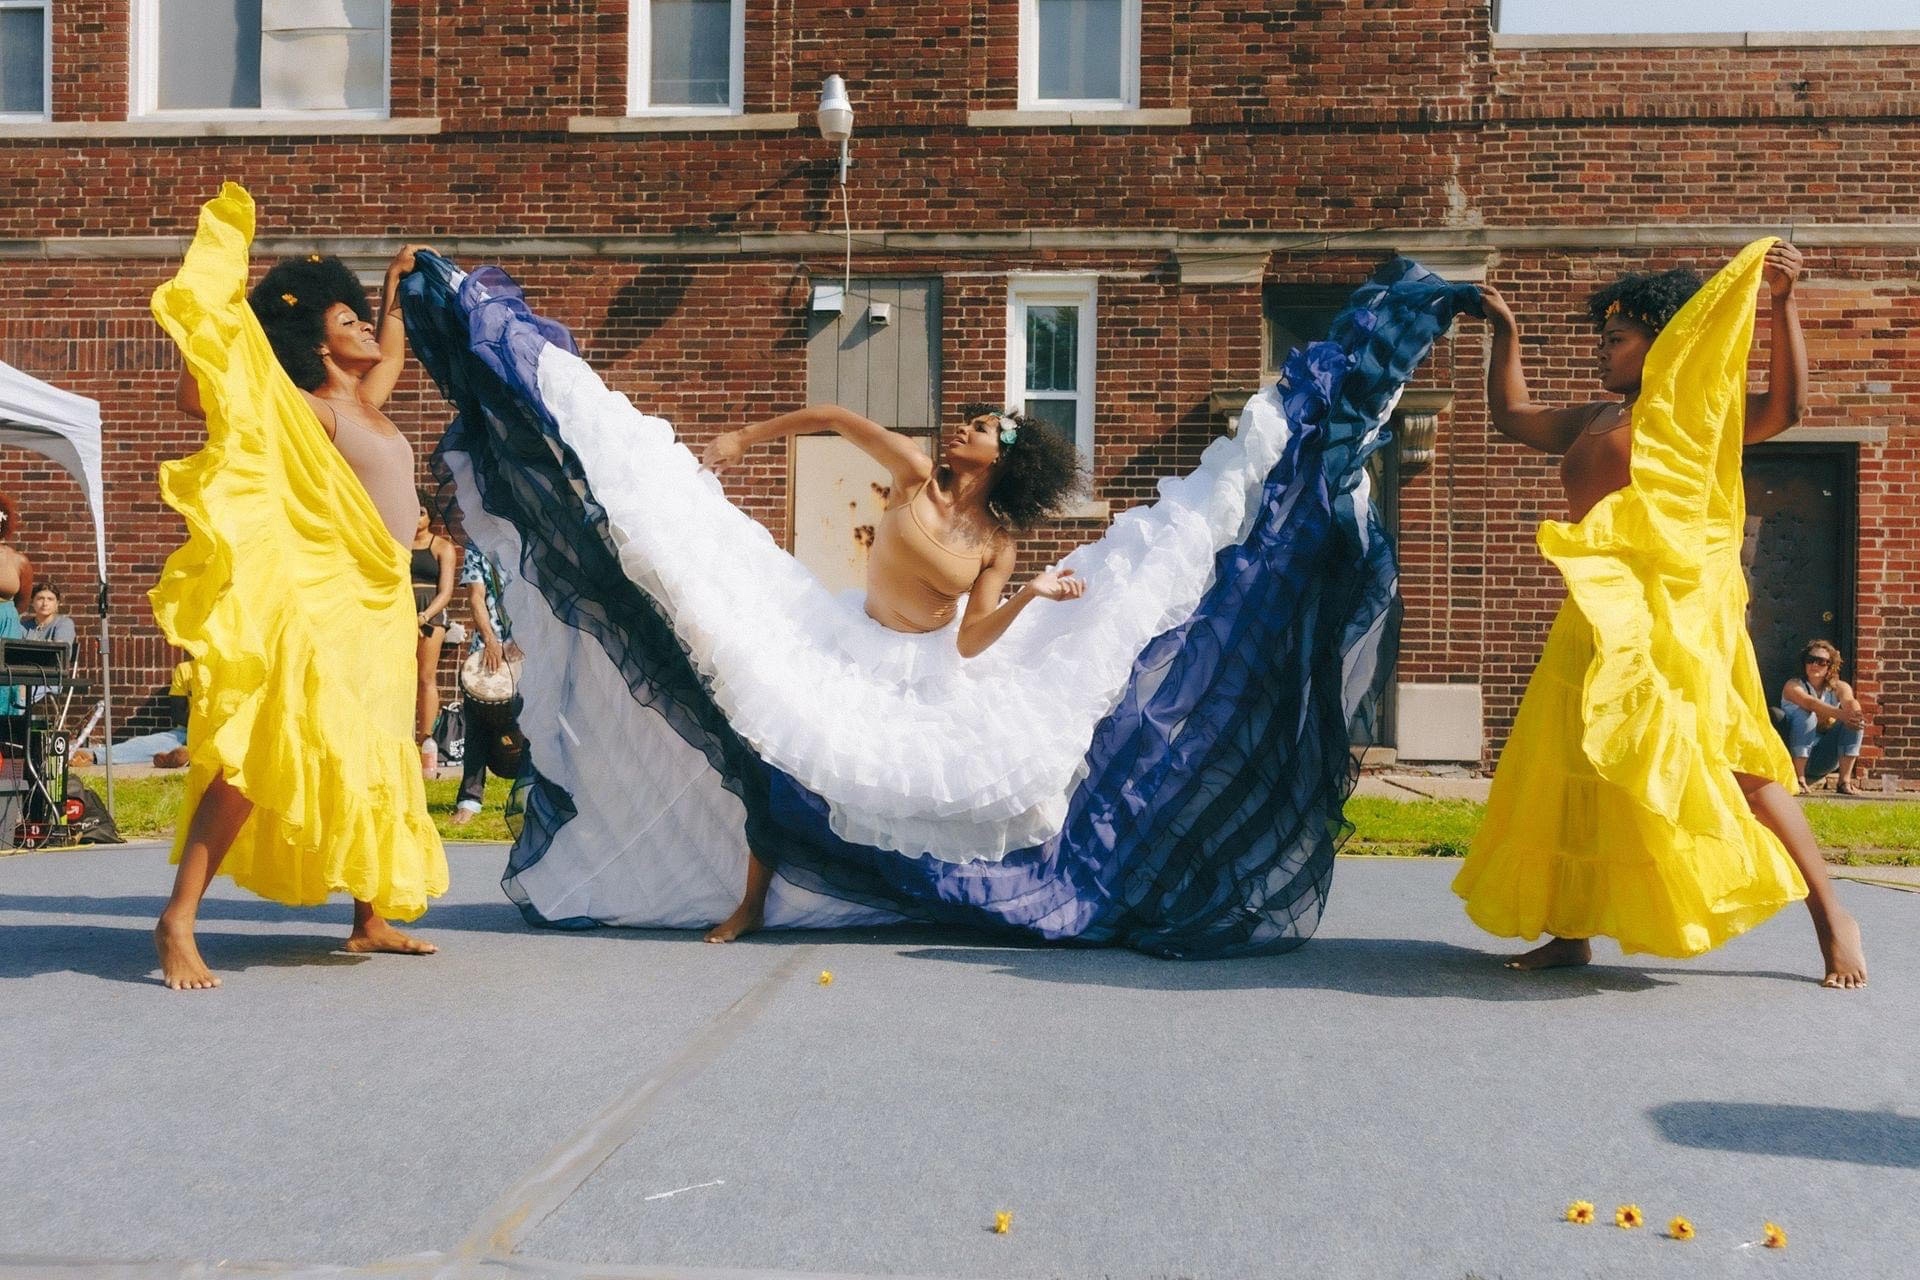 Students dance in colorful dresses on campus